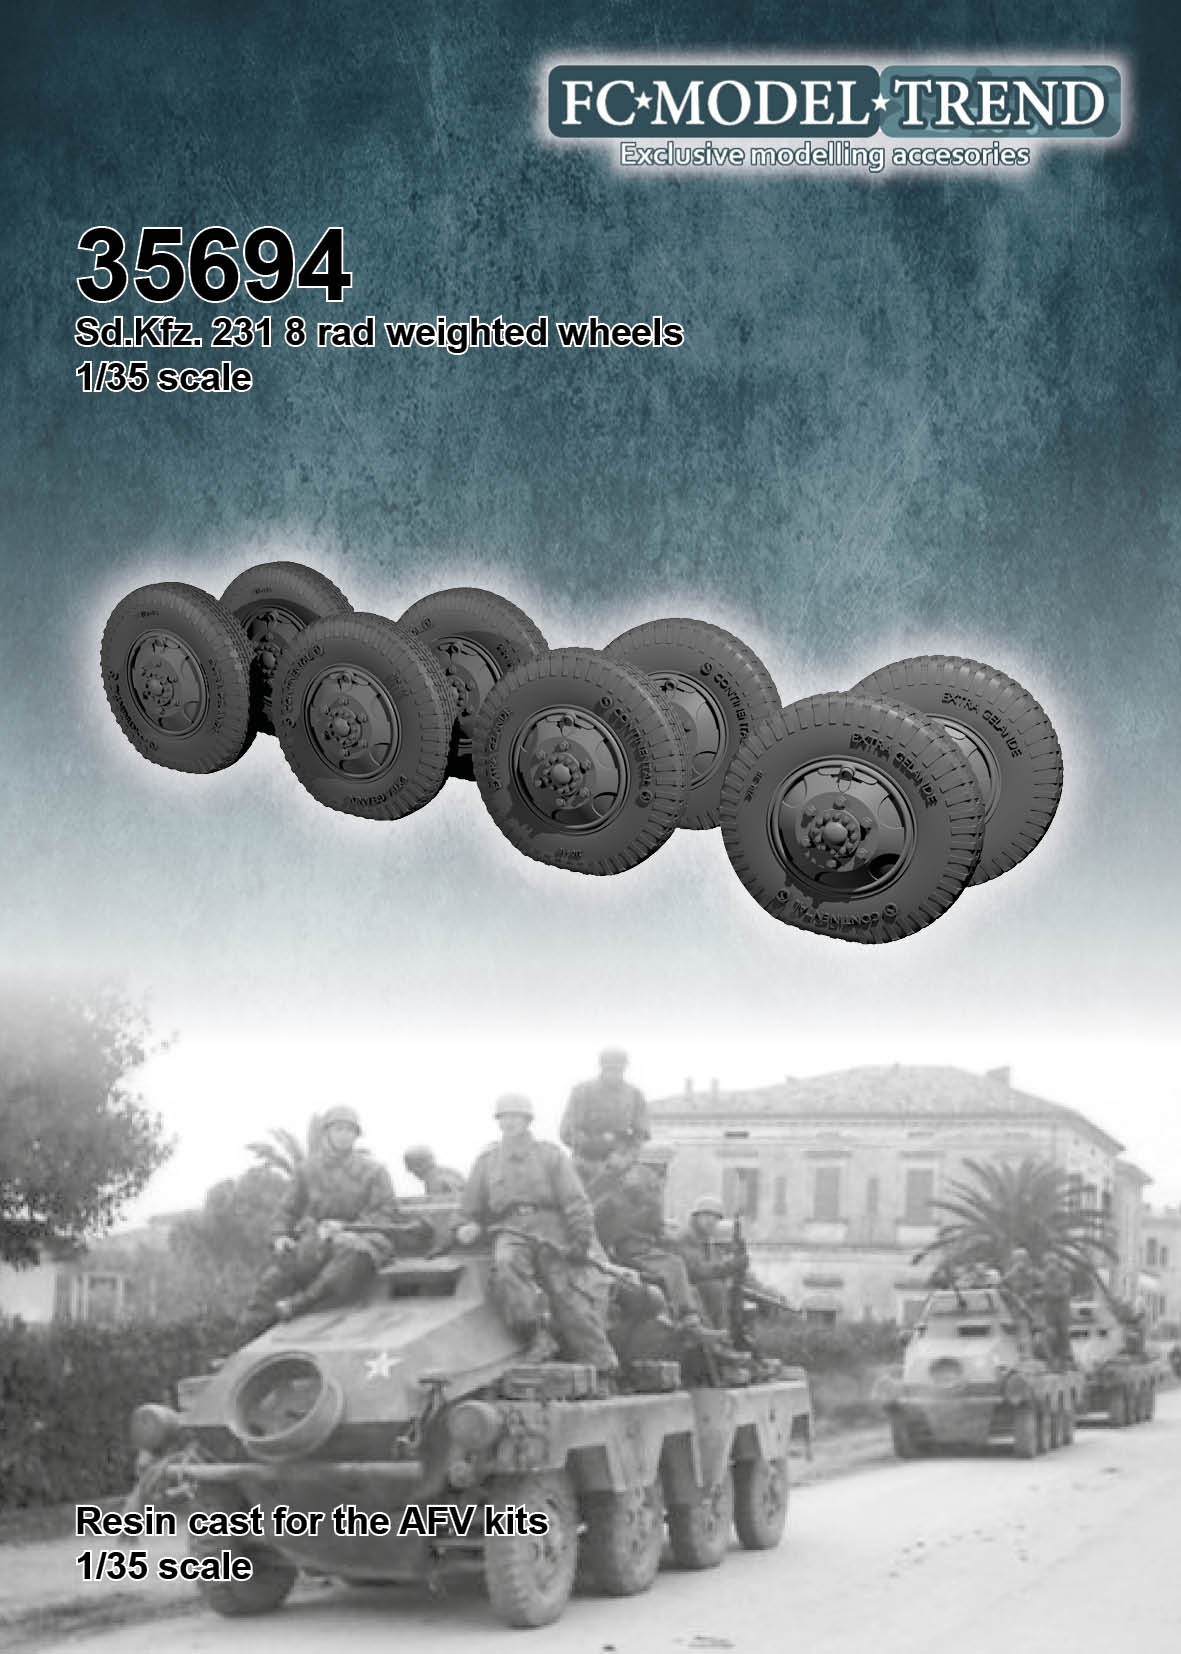 SdKfz 231 8 rad weighted wheels, resin cast 1/35 scale for the AFV kits